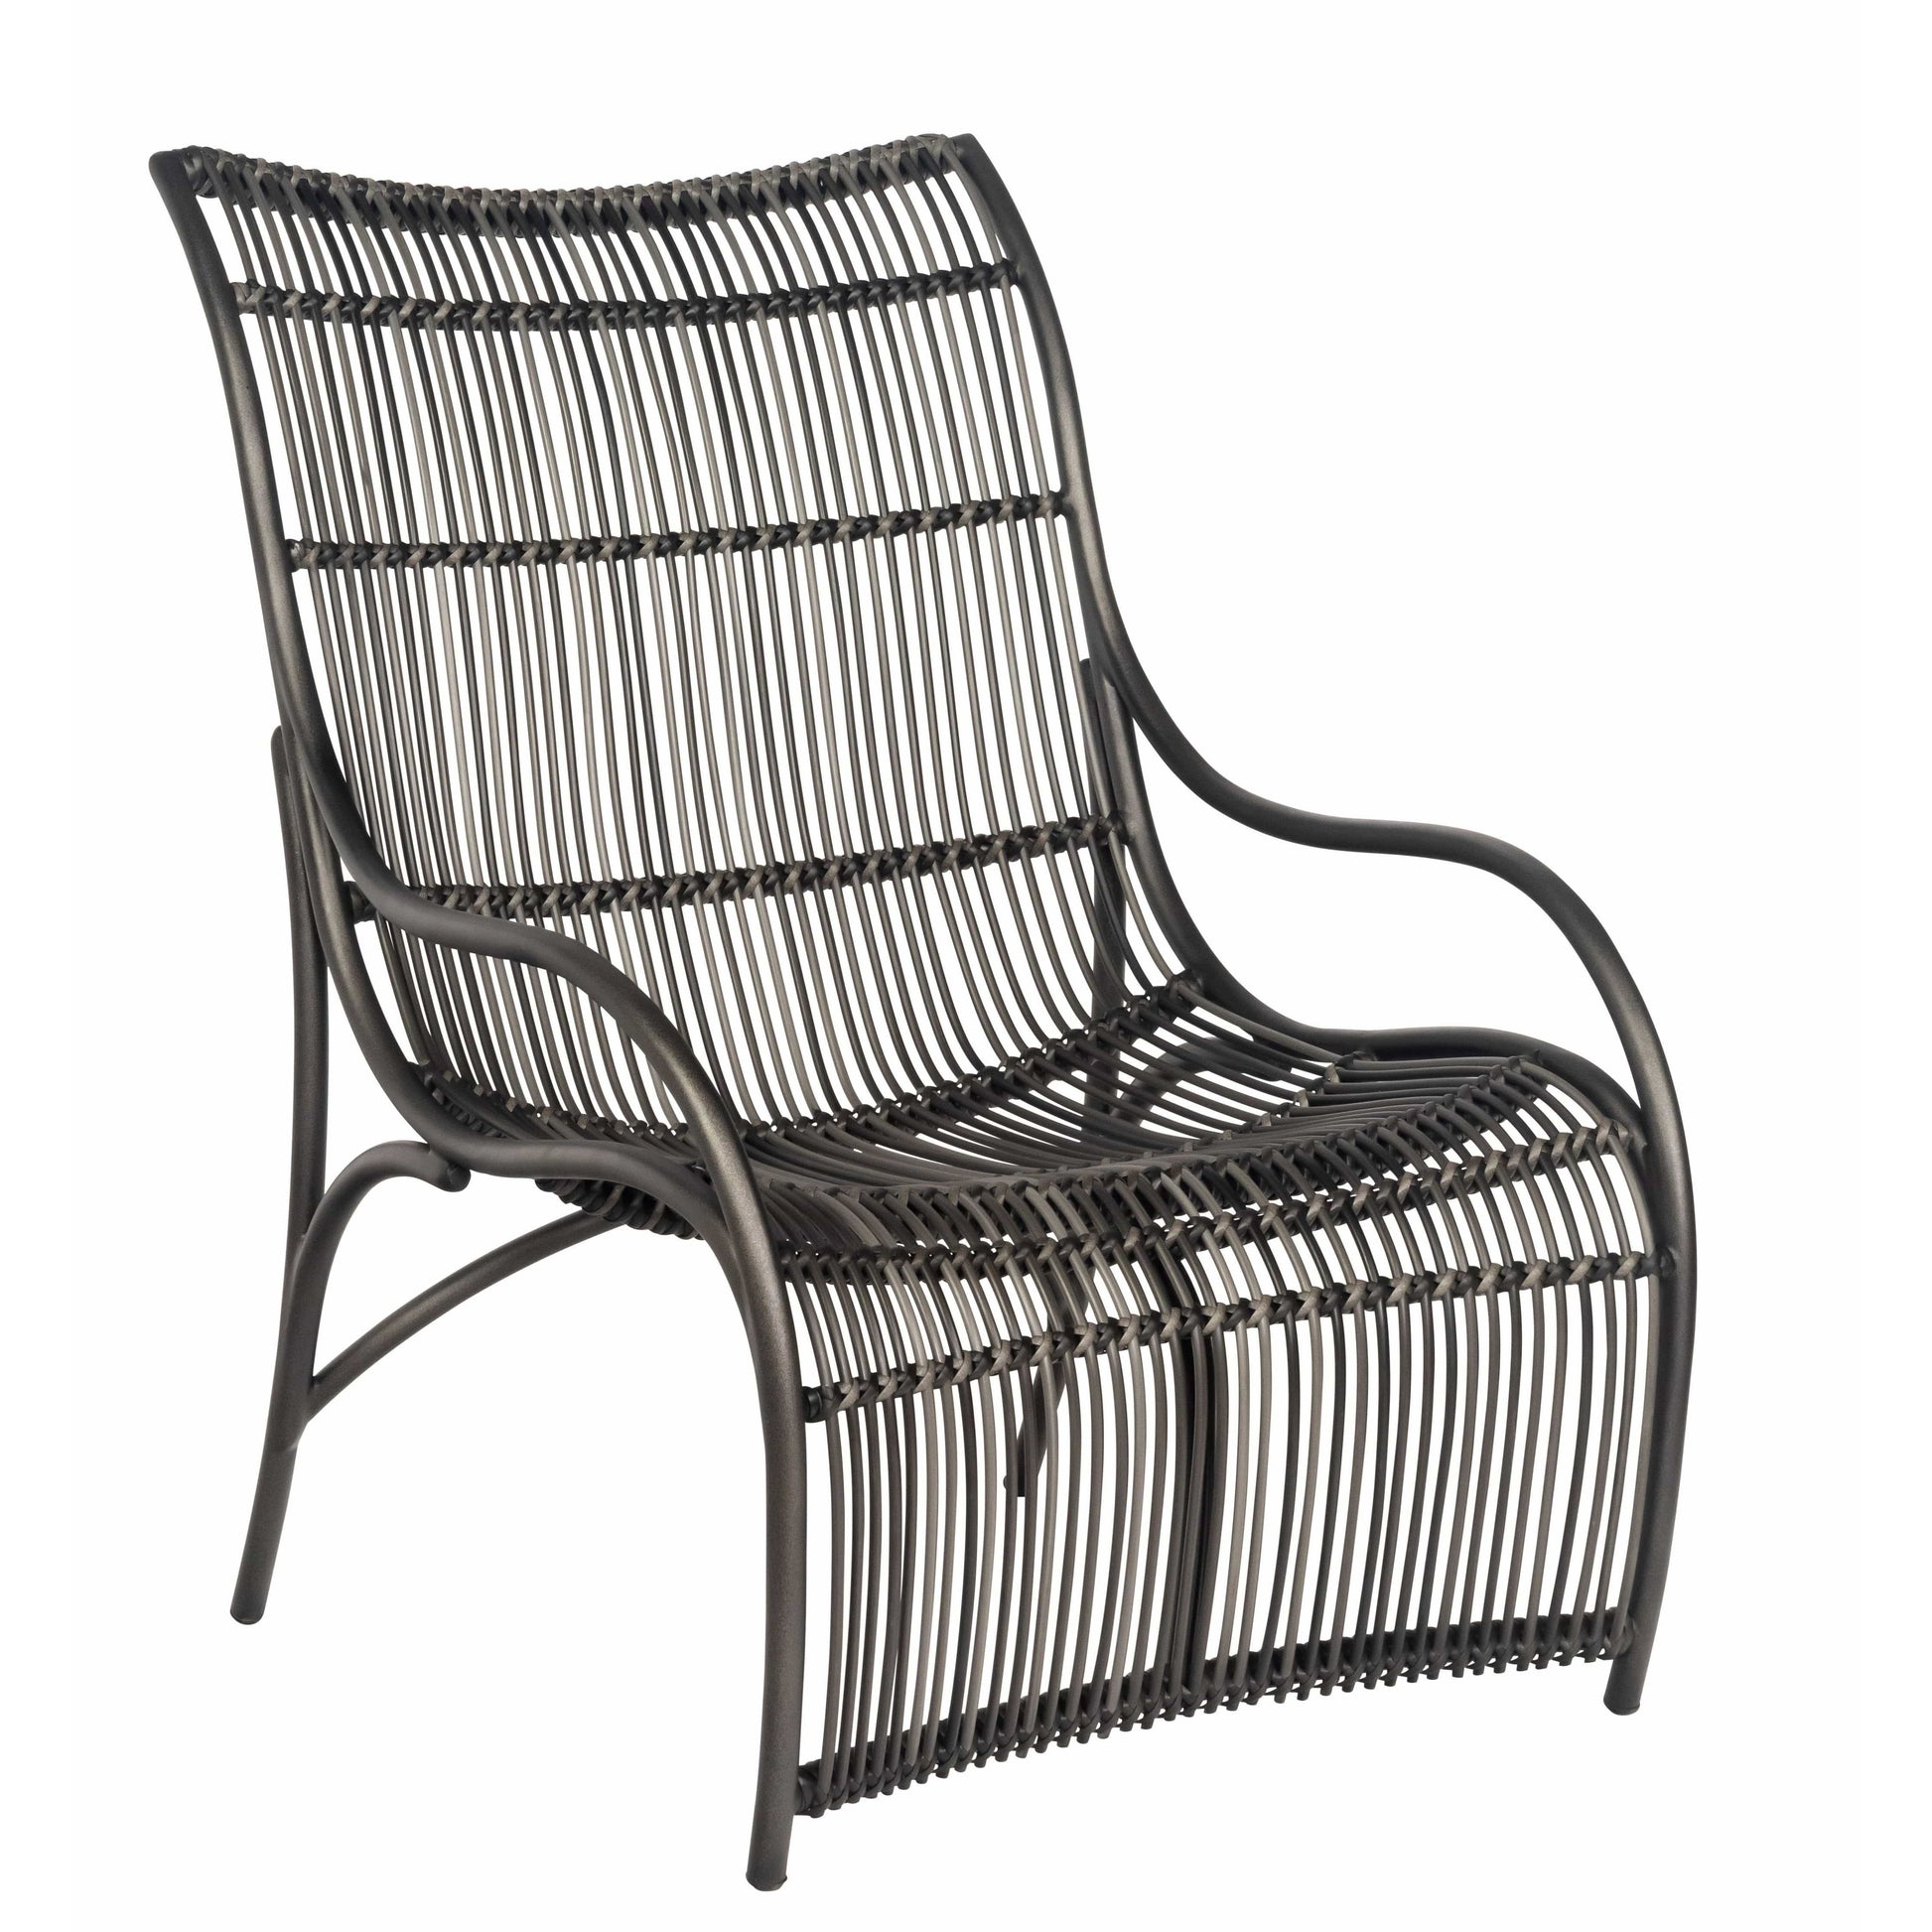 Cape Large Lounge Chair S508601 Woodard Outdoor Patio | Canaveral Collection Seating Woodard 